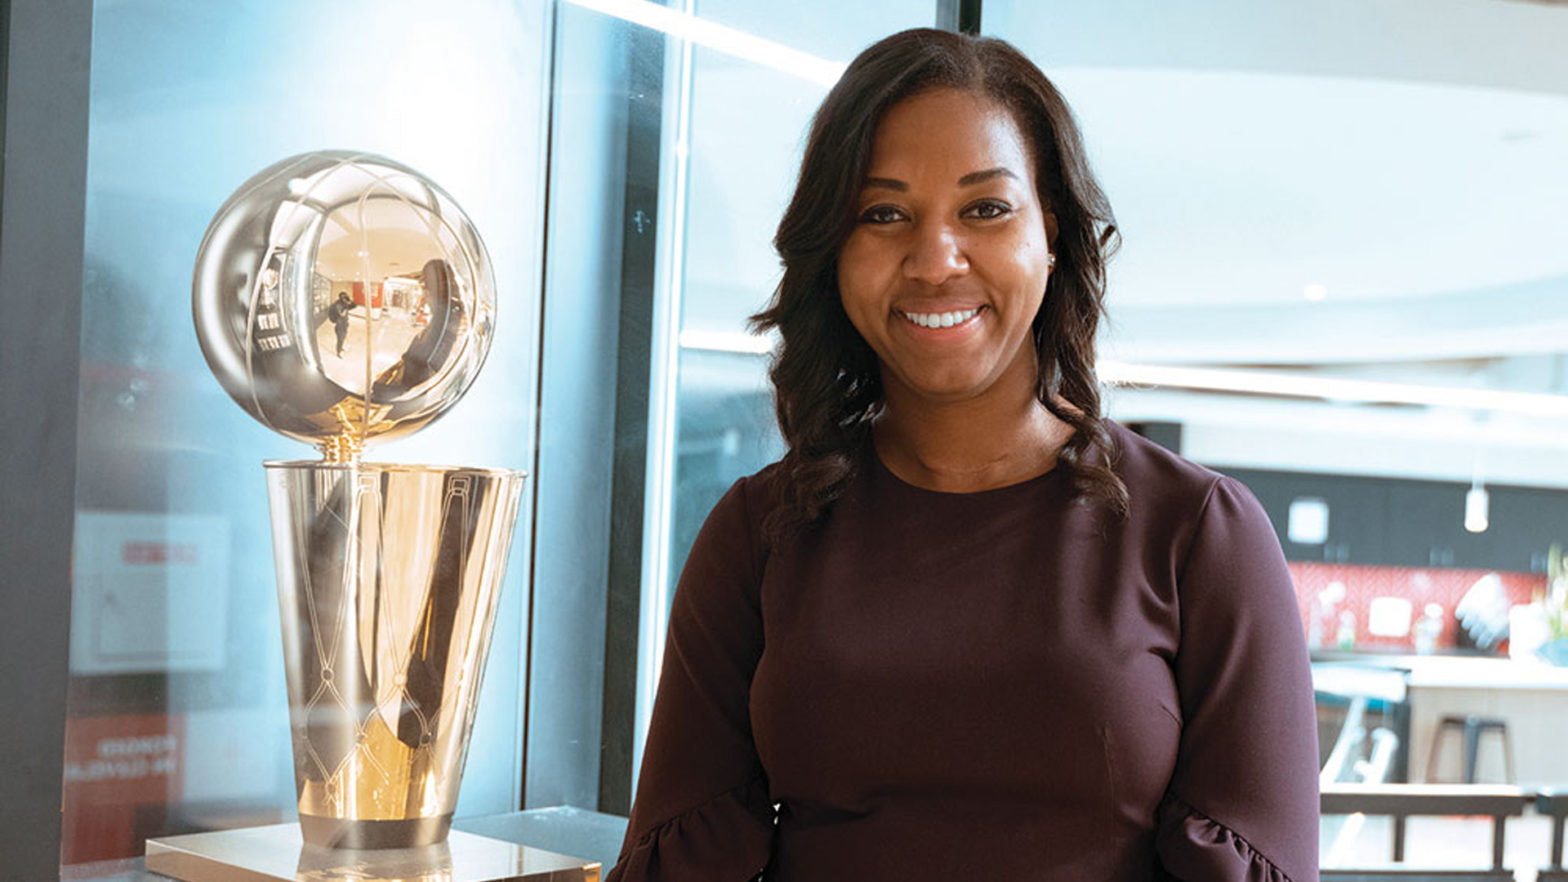 Shelly Cayette Makes History As The First Chief Operating Officer Of An NBA Team